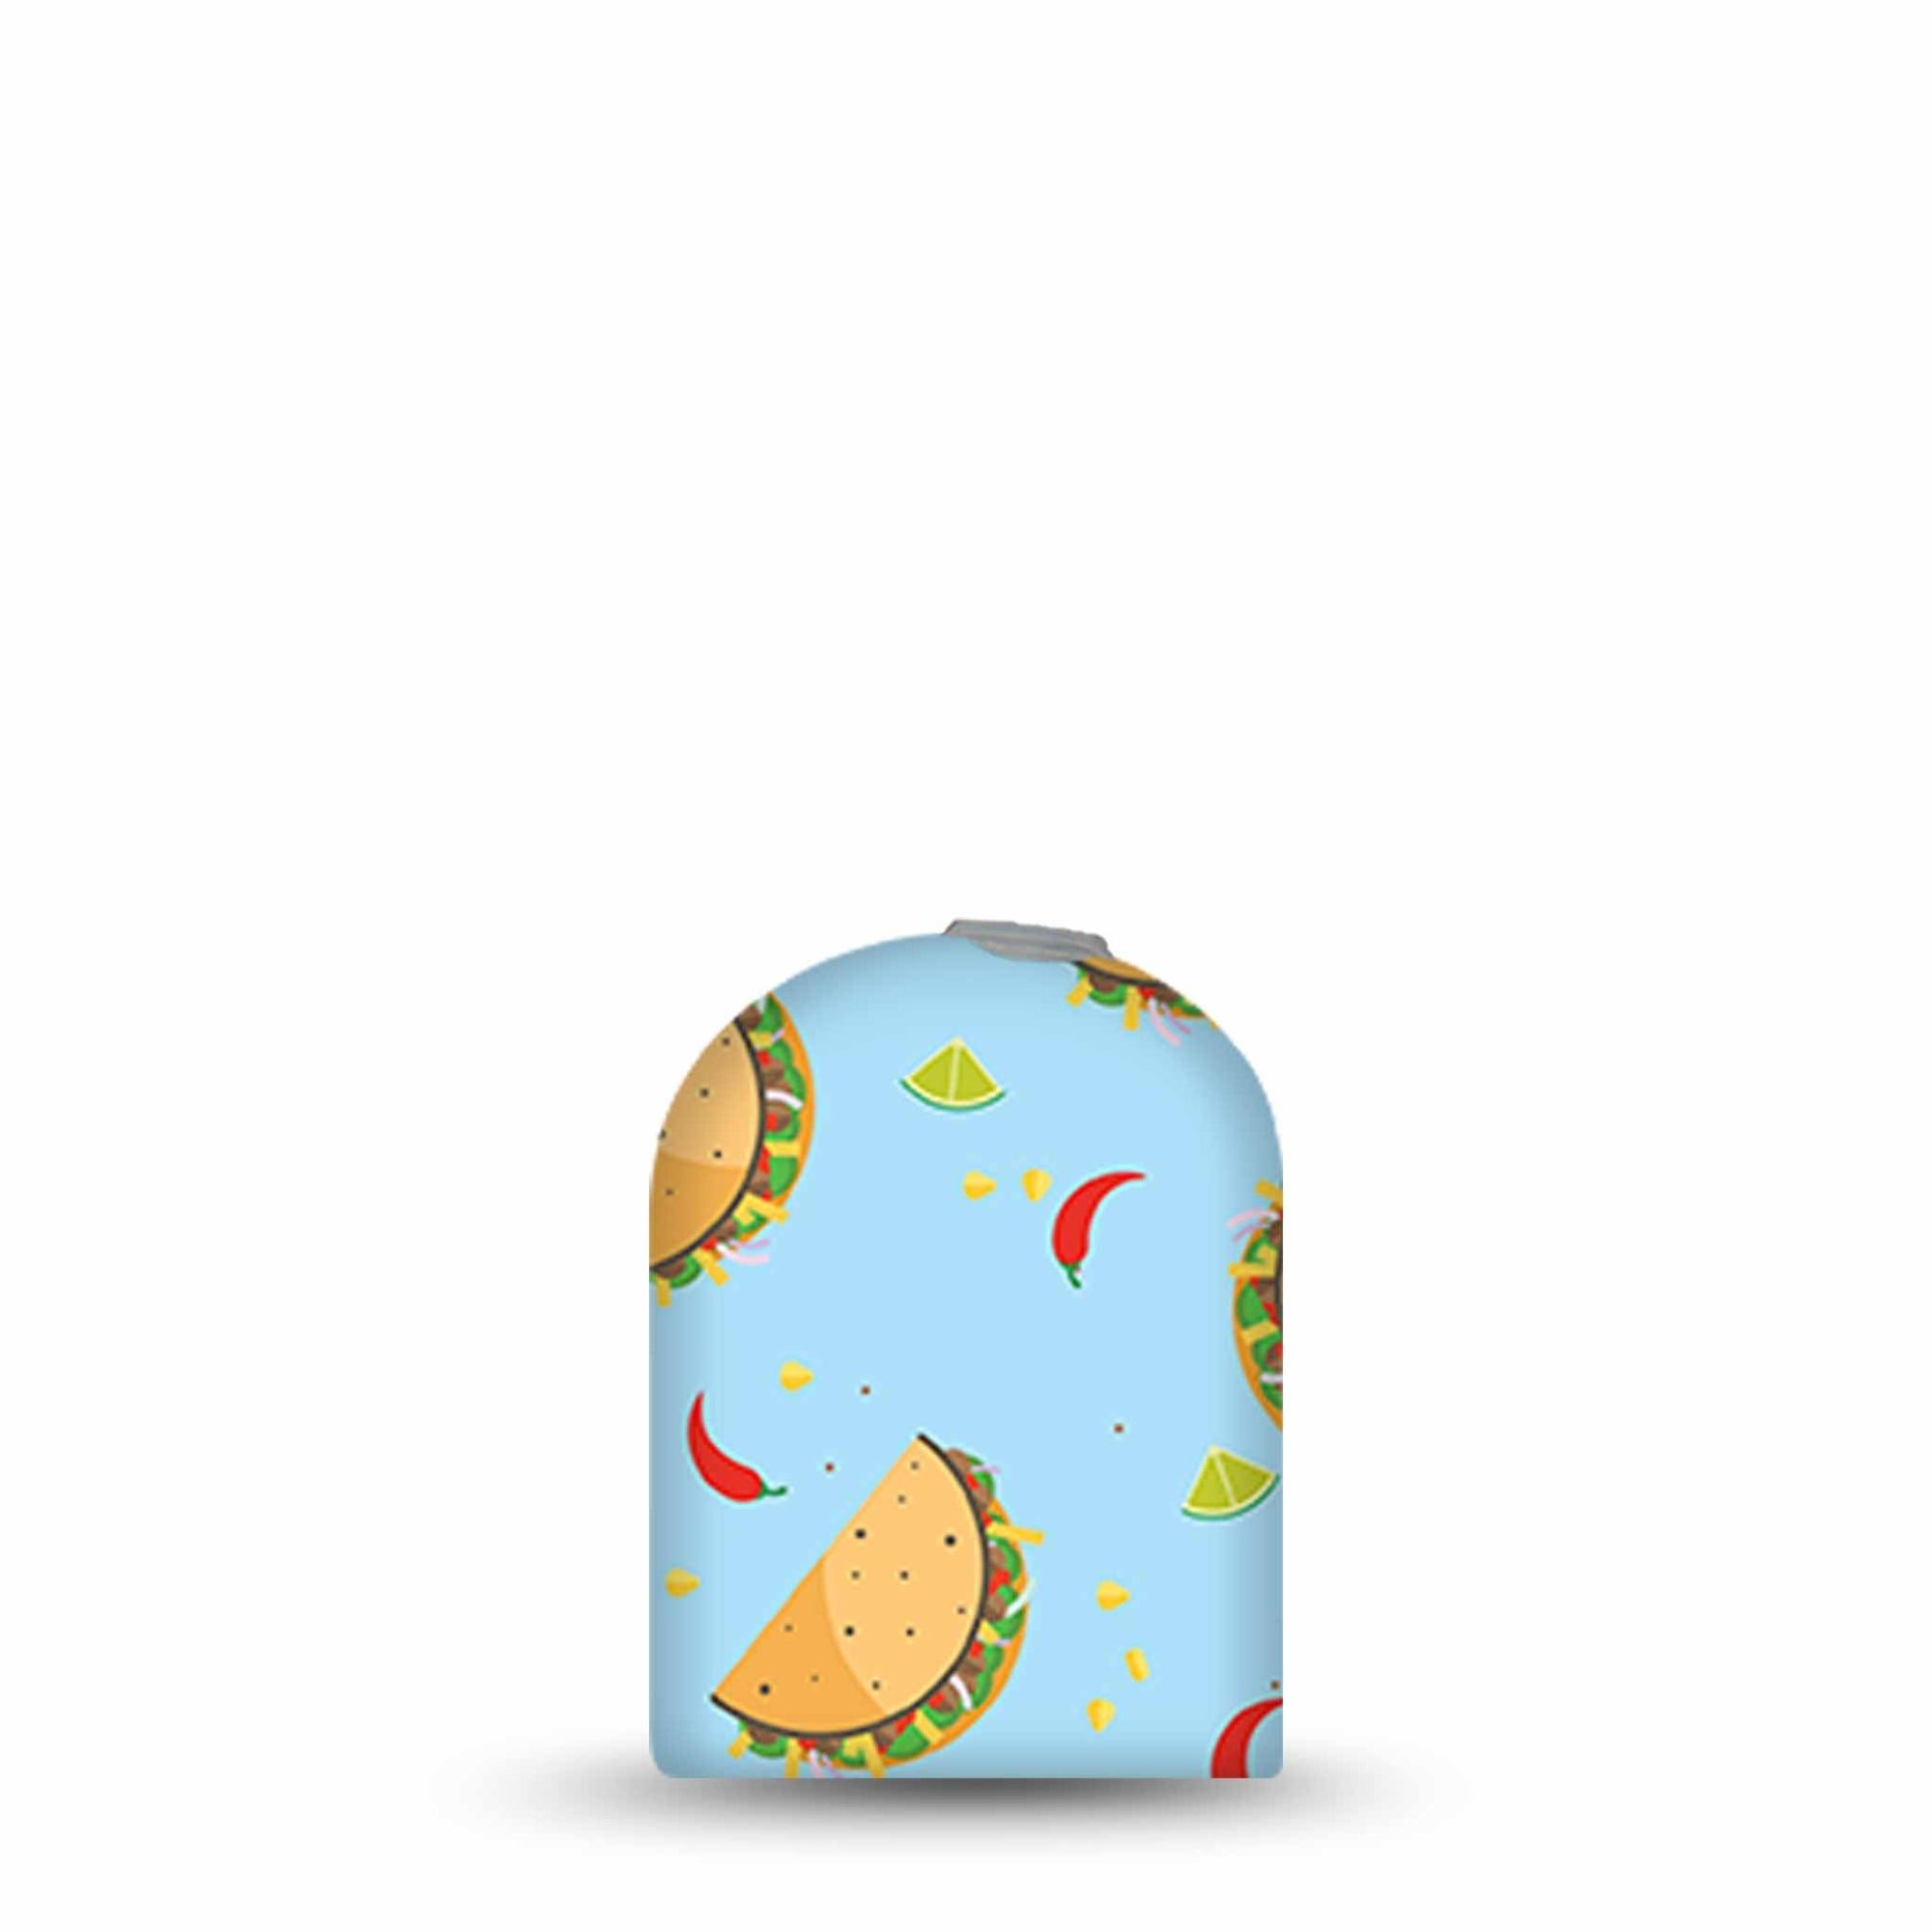 ExpressionMed Spicy Tacos Pod Full Wrap Sticker Pod Full Wrap Sticker Single Sticker Taco Jalepenos Pattern Vinyl Decoration  Pump design